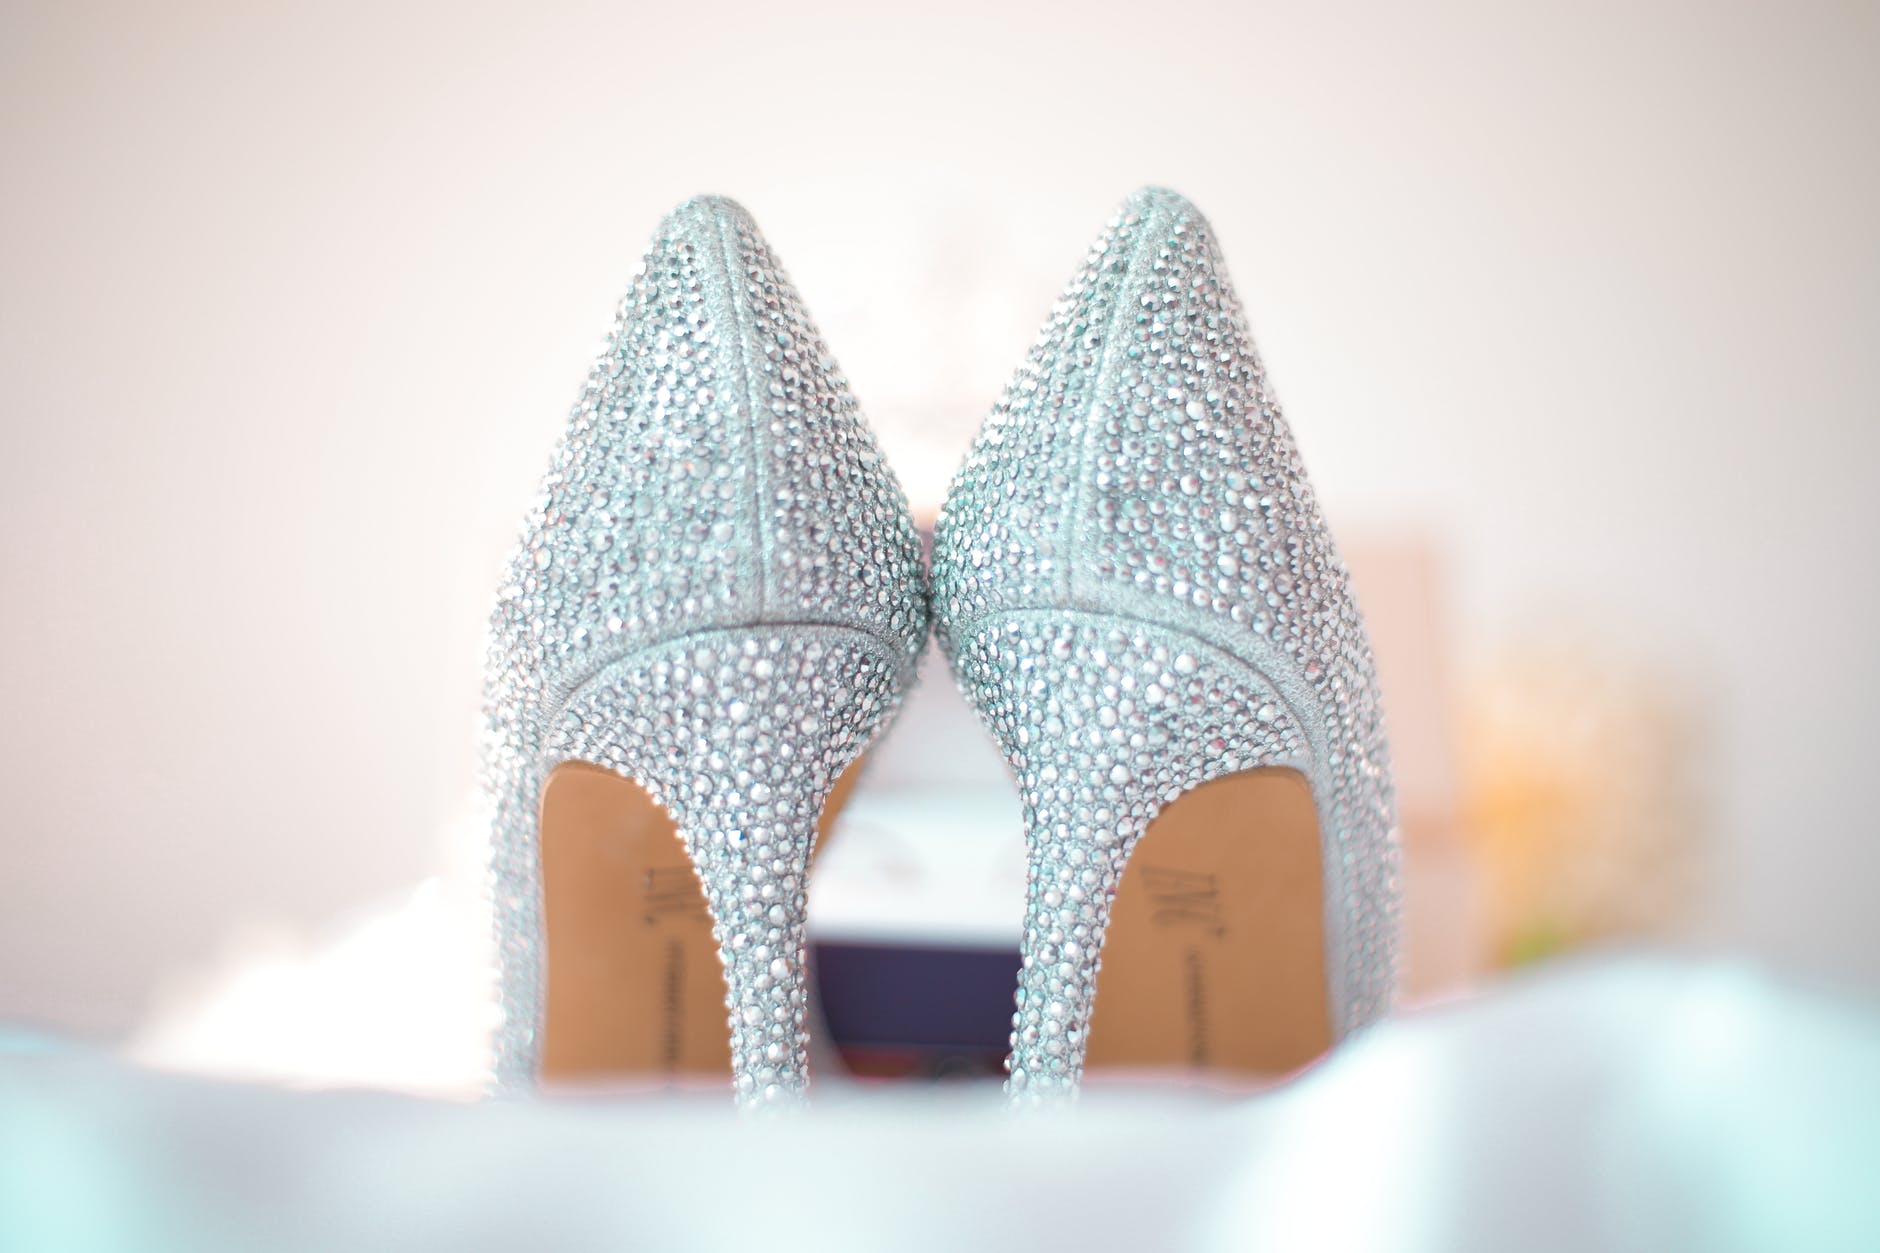 high heels covered in crystals